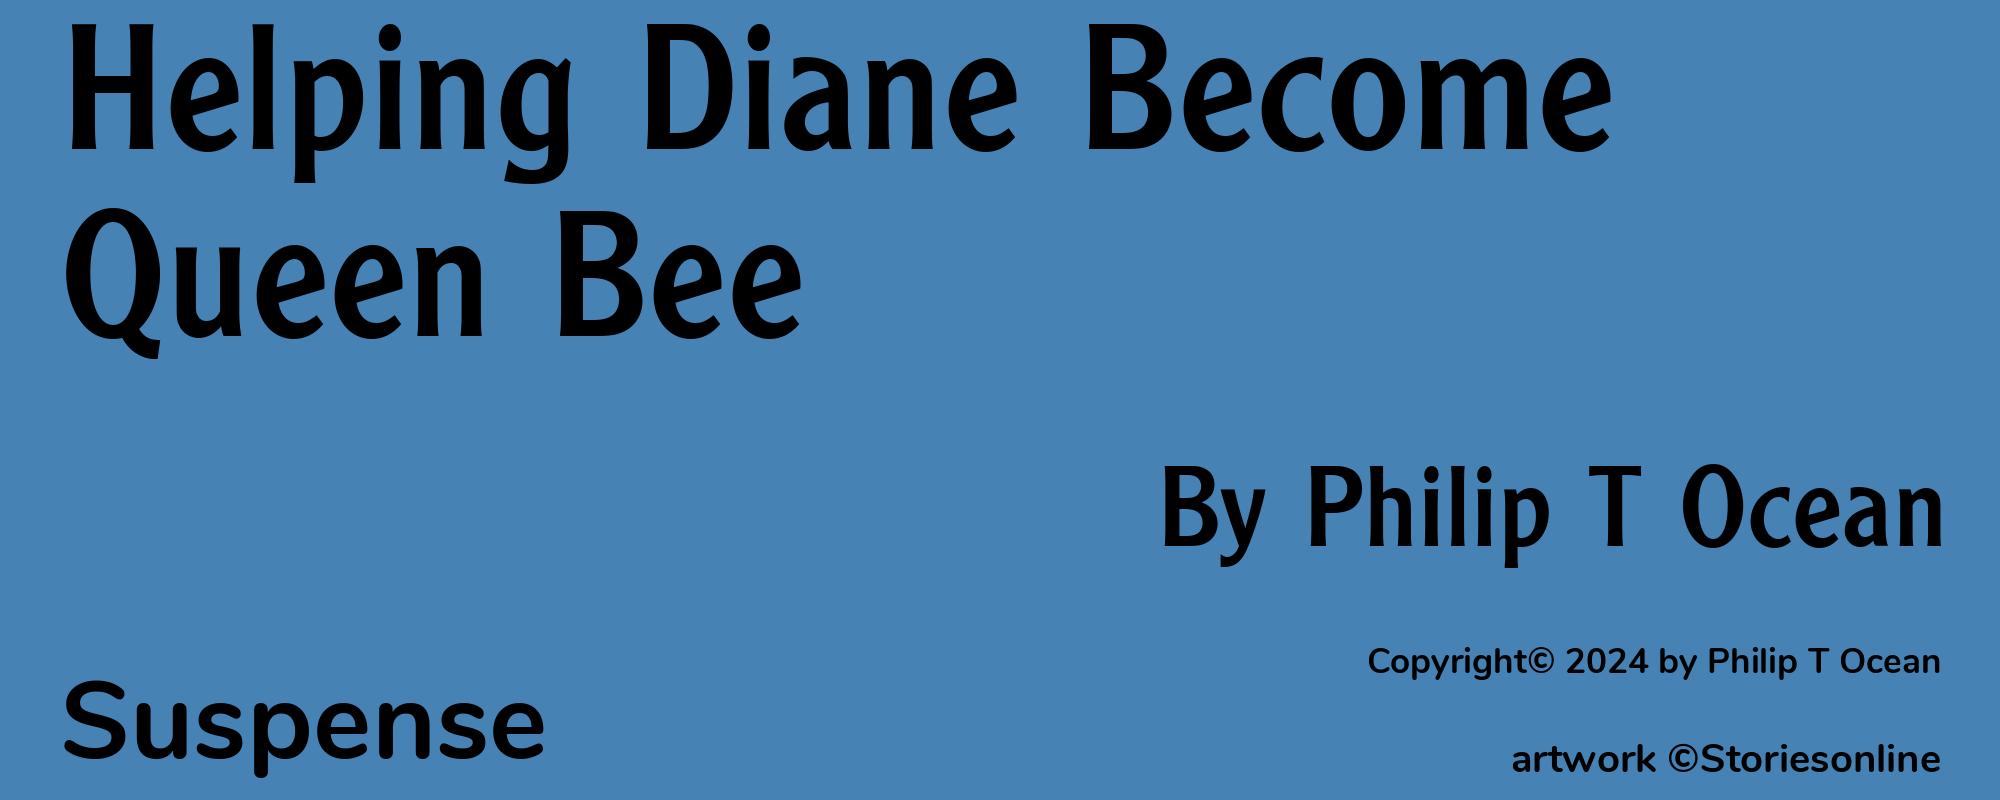 Helping Diane Become Queen Bee - Cover